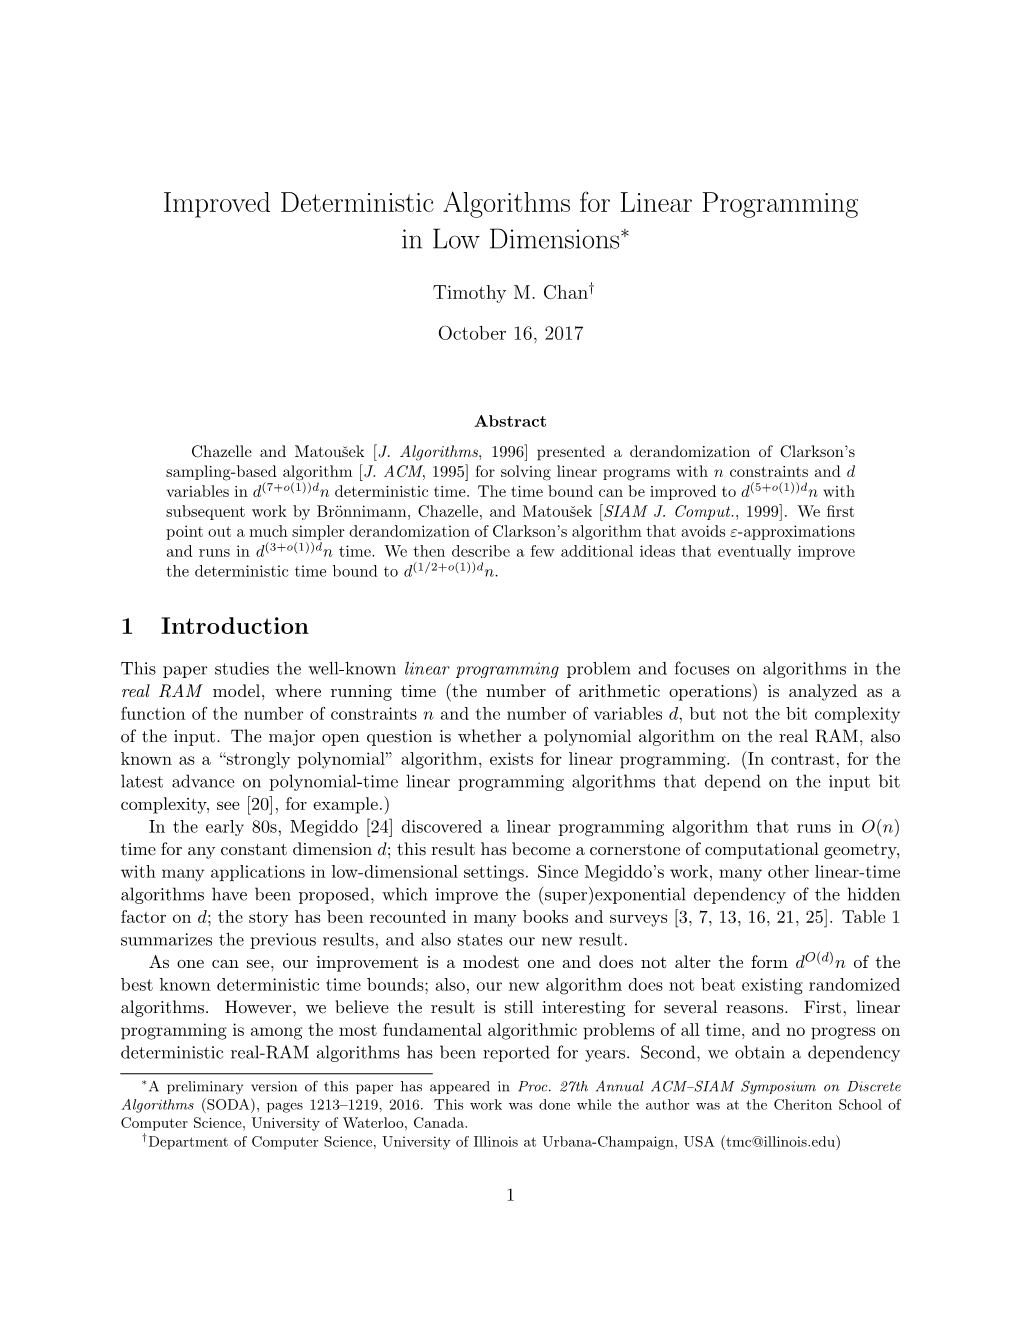 Improved Deterministic Algorithms for Linear Programming in Low Dimensions∗